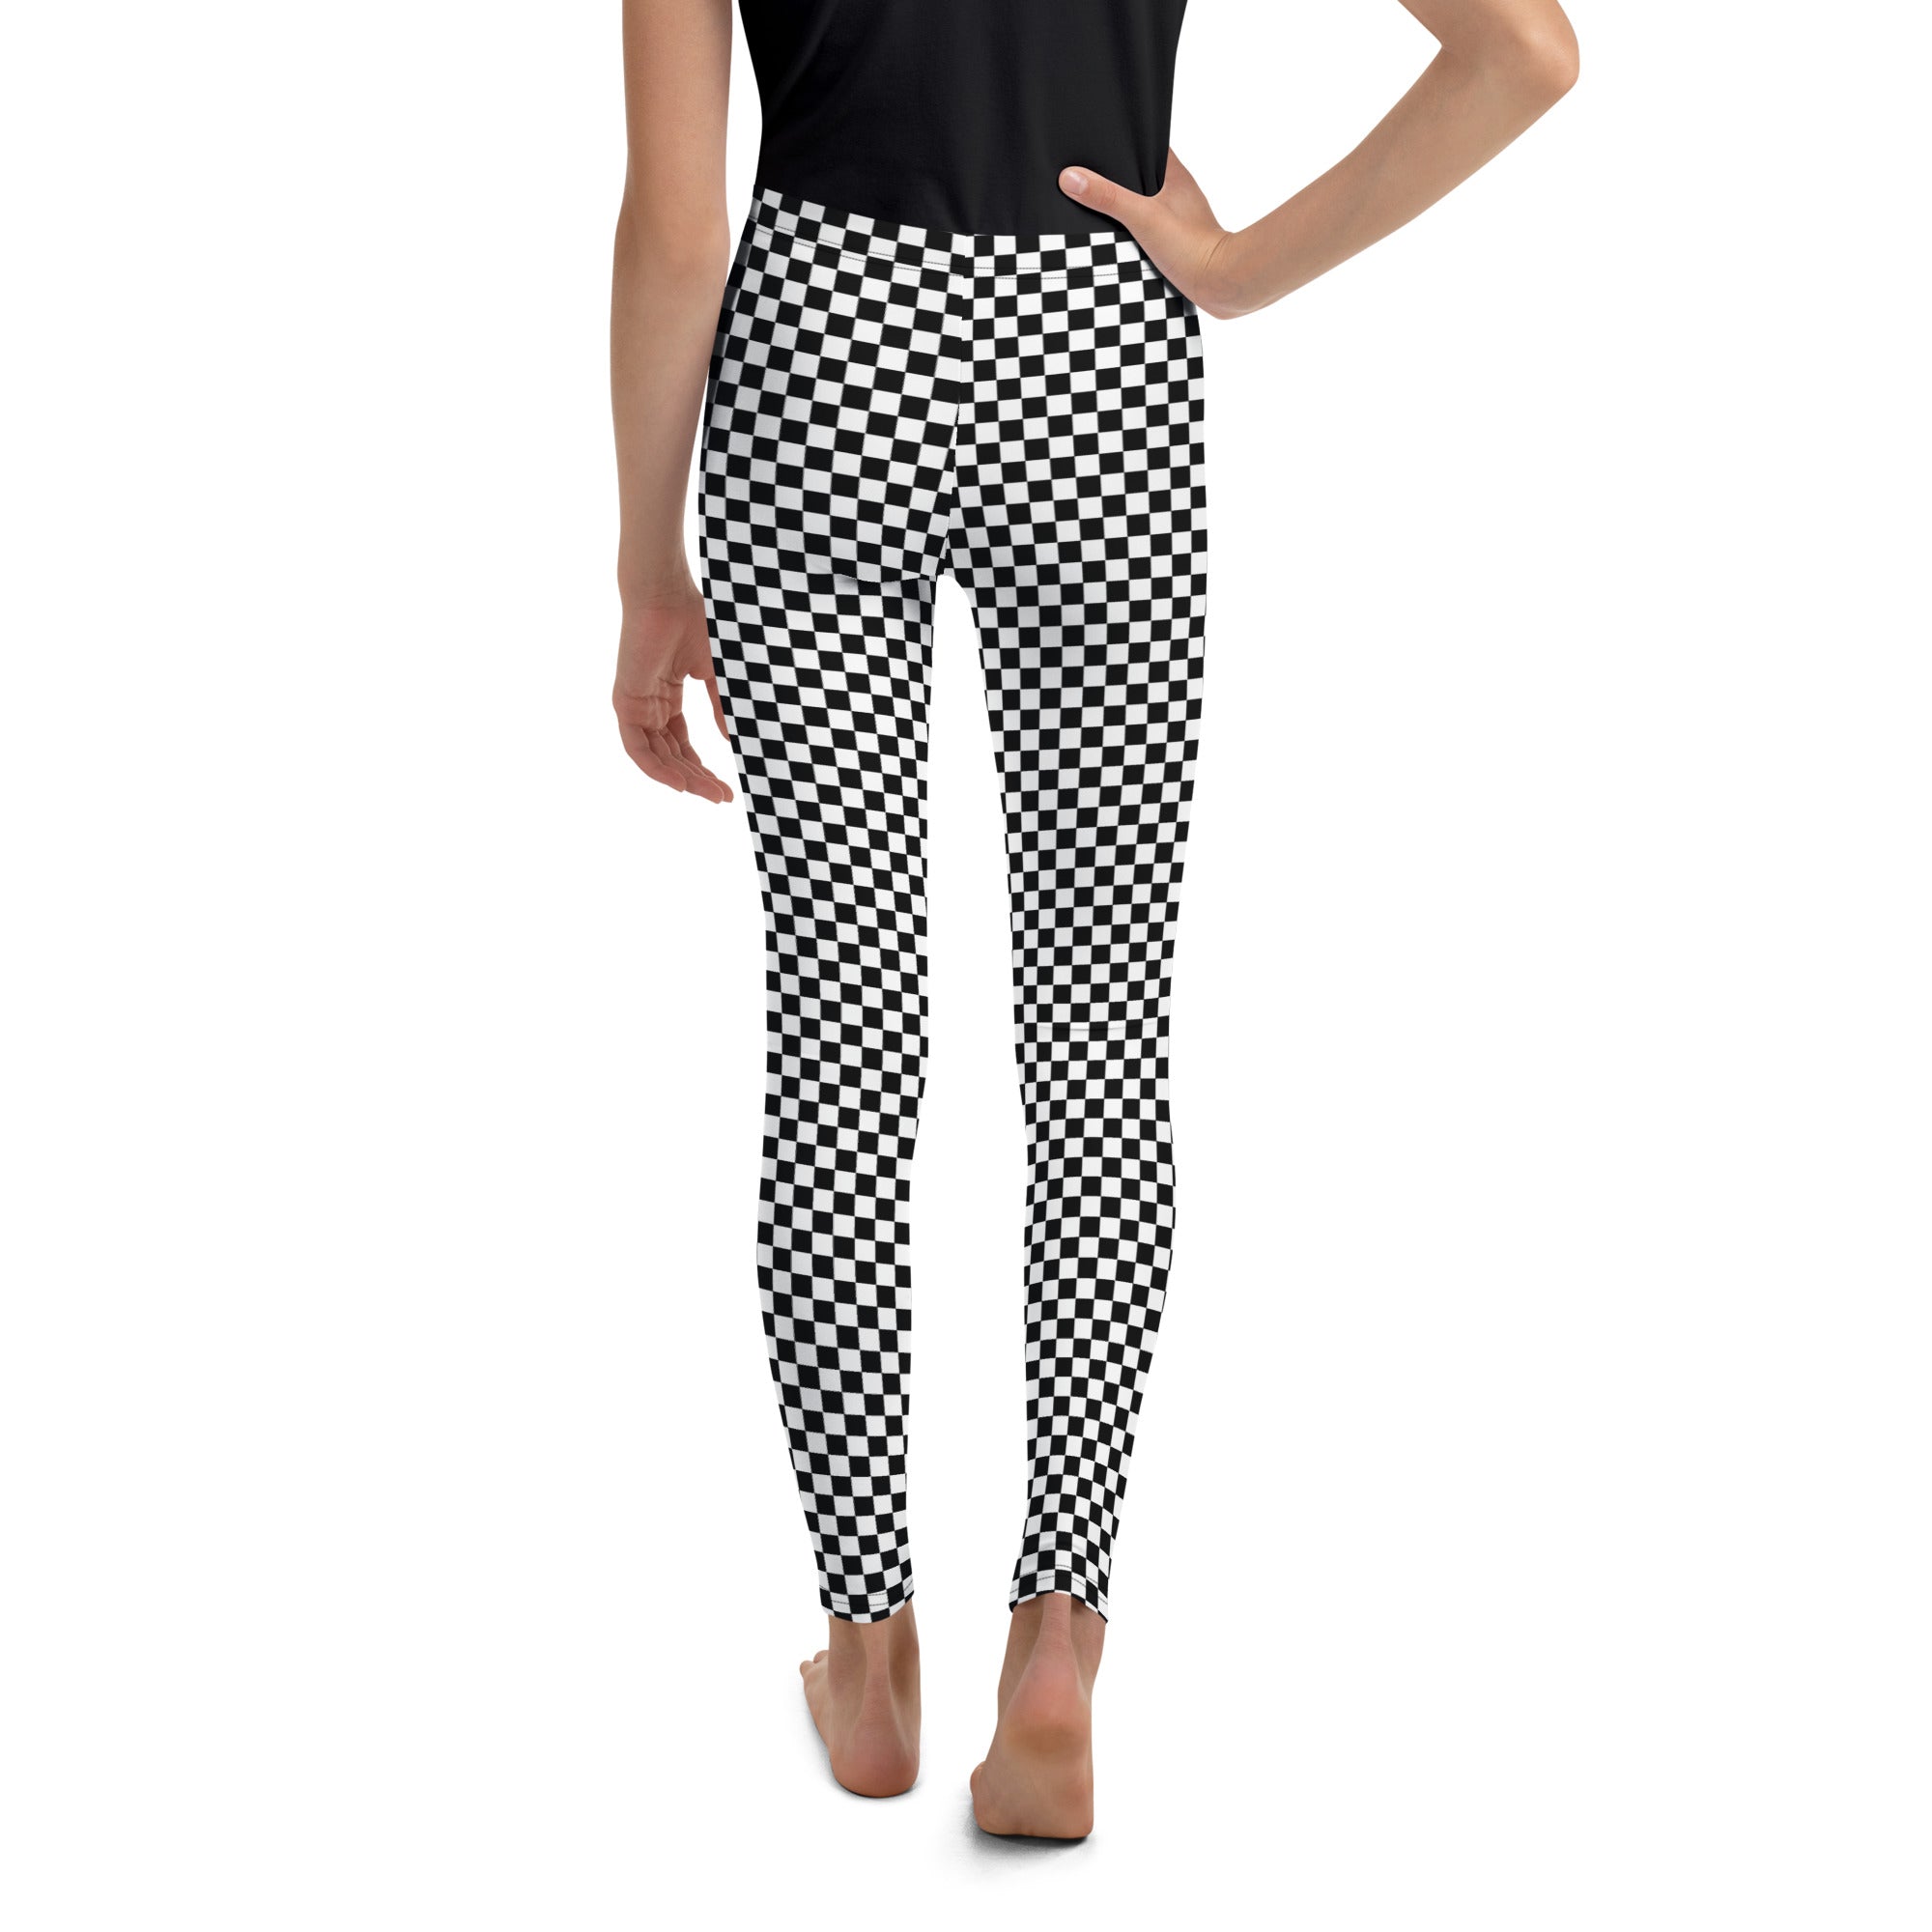 Checkered Youth Leggings